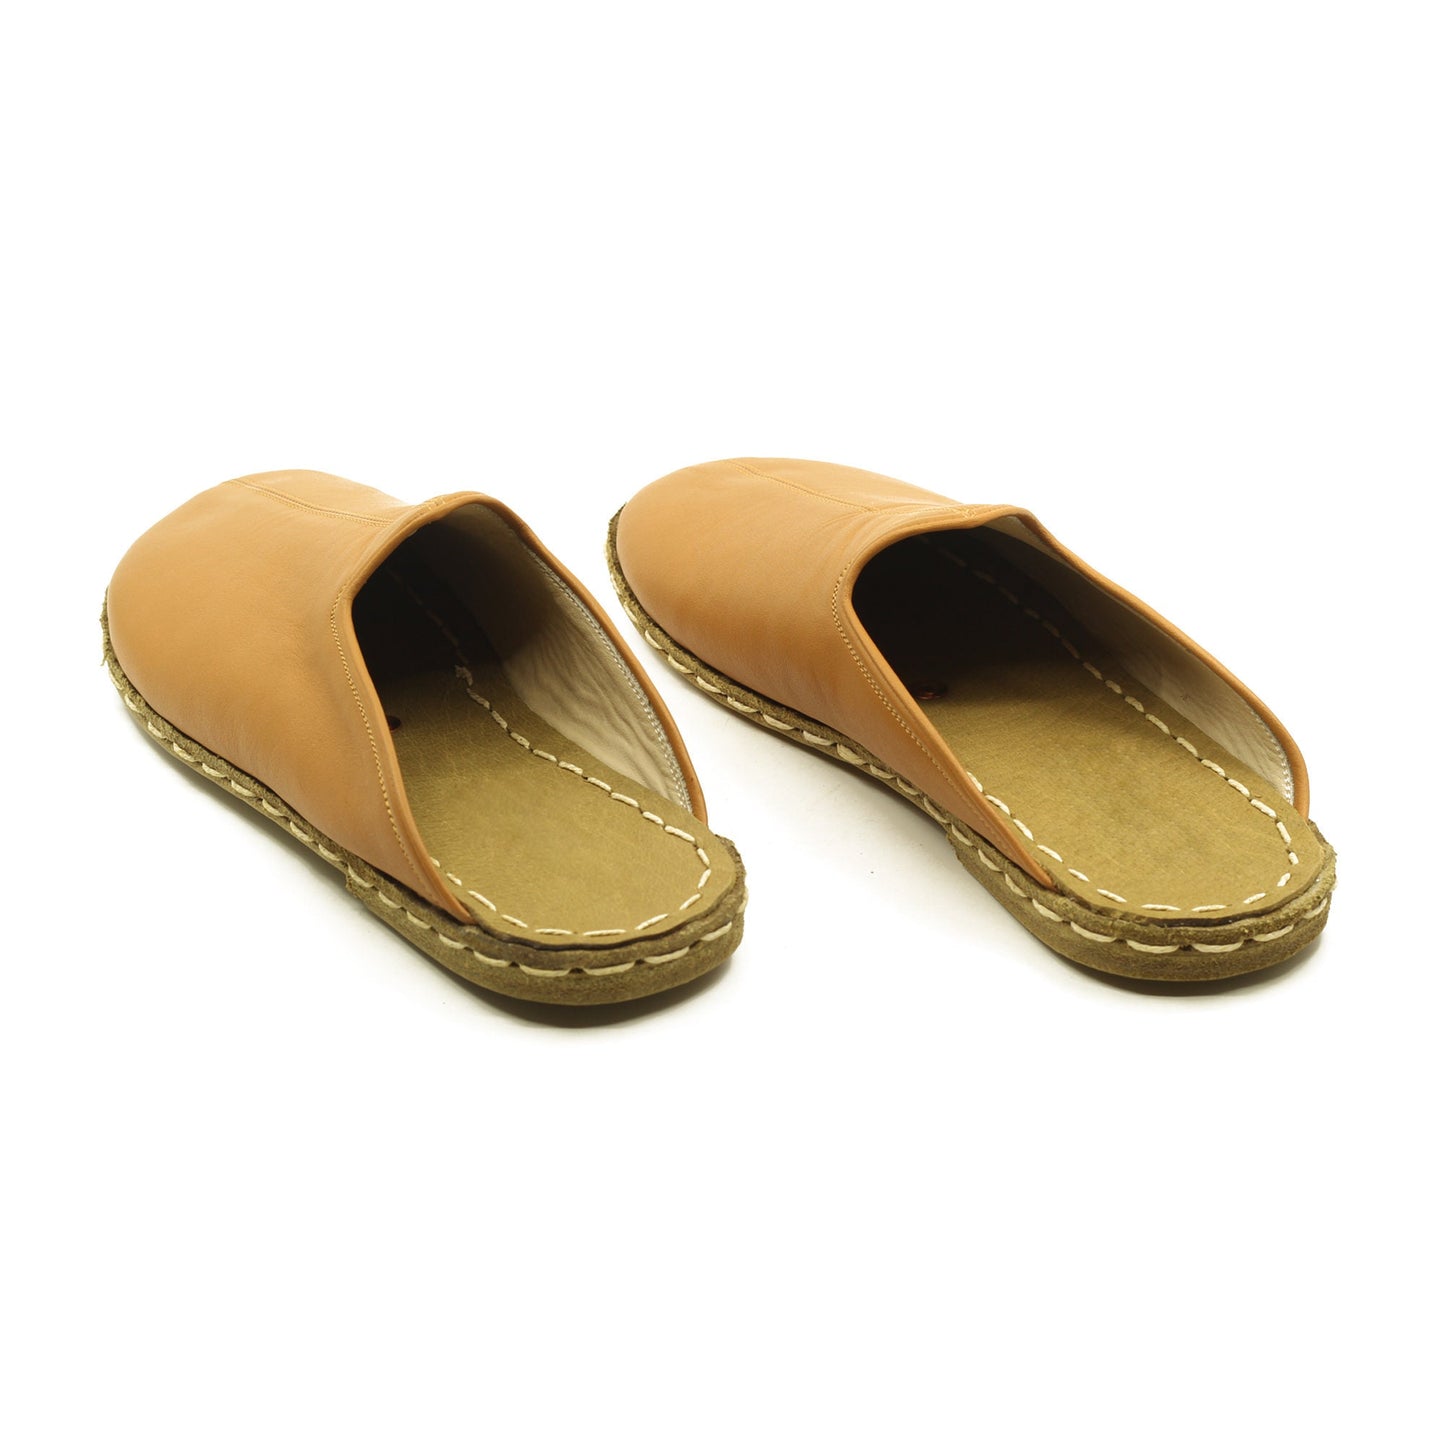 Closed Toe Leather Women's Slippers Light Brown